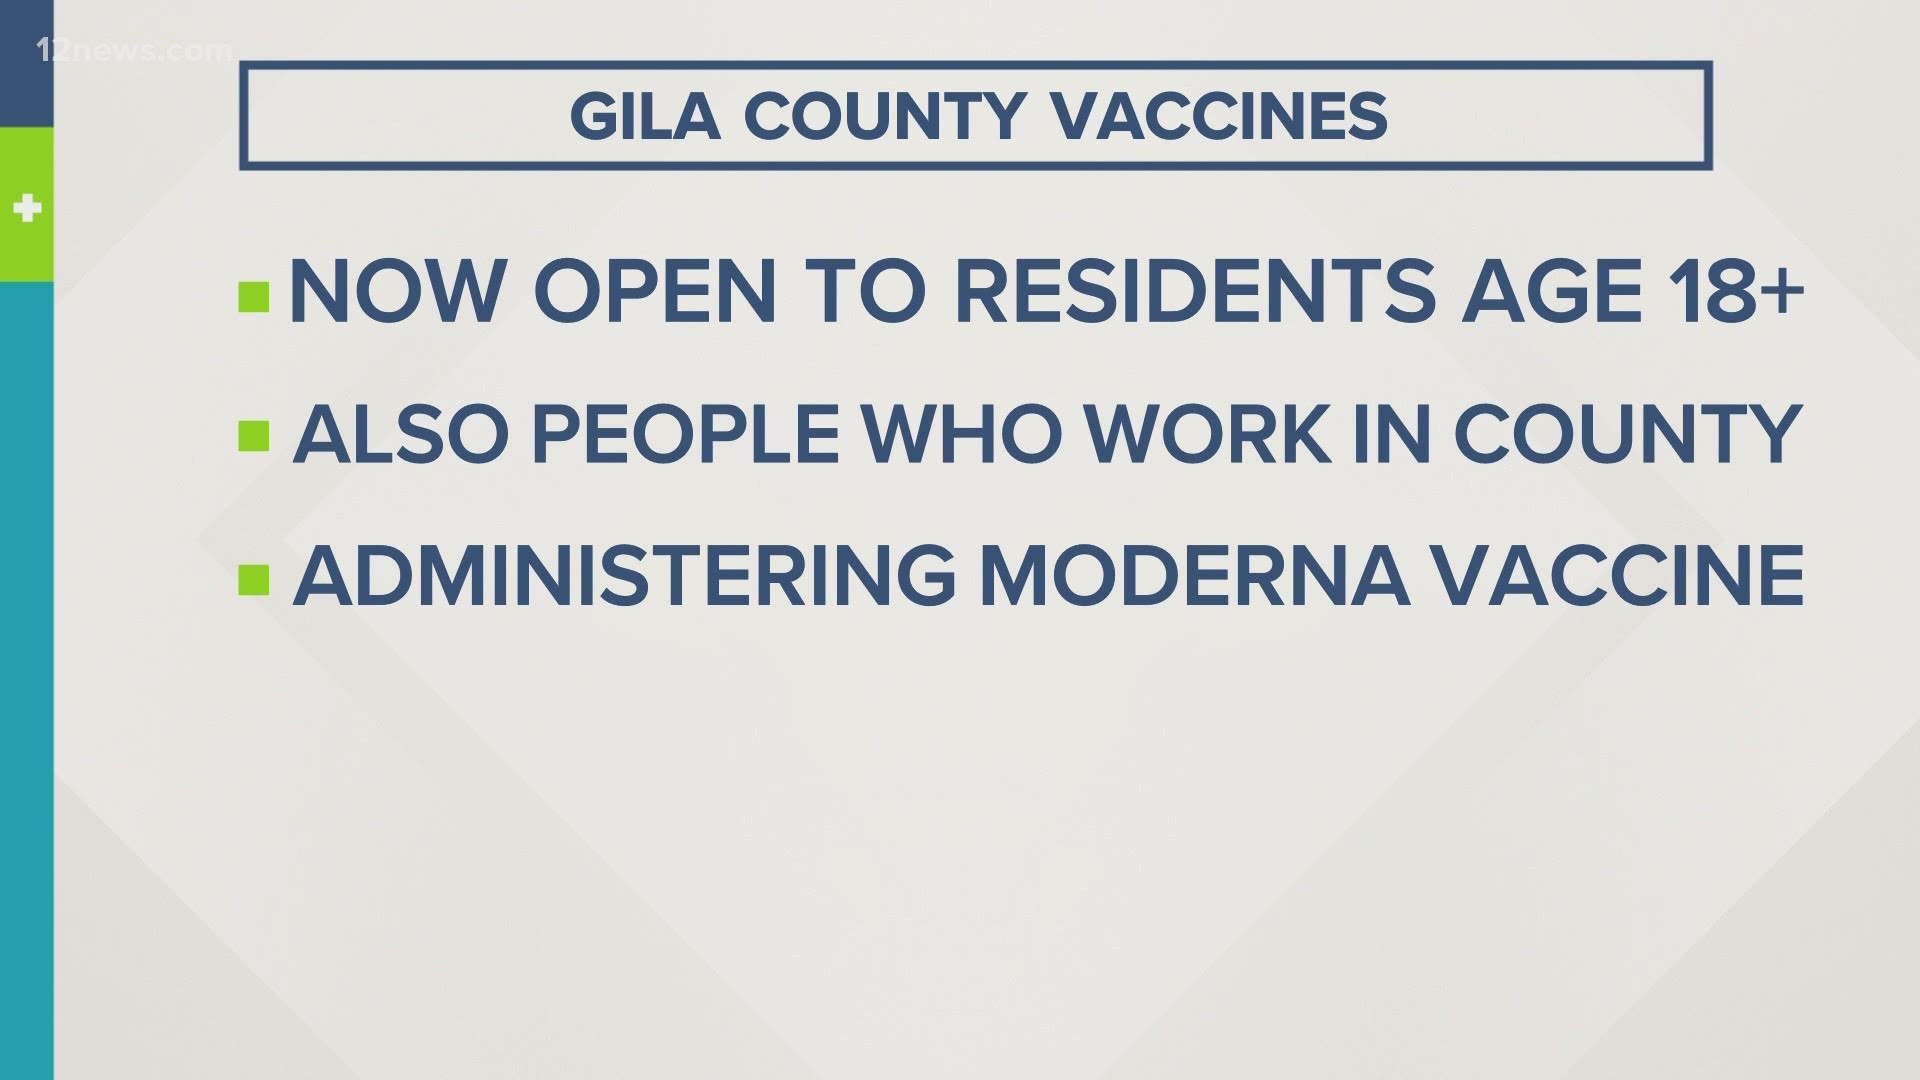 Gila County is making the Moderna COVID-19 vaccine available to all of the adults living in the county of 54,000 people.